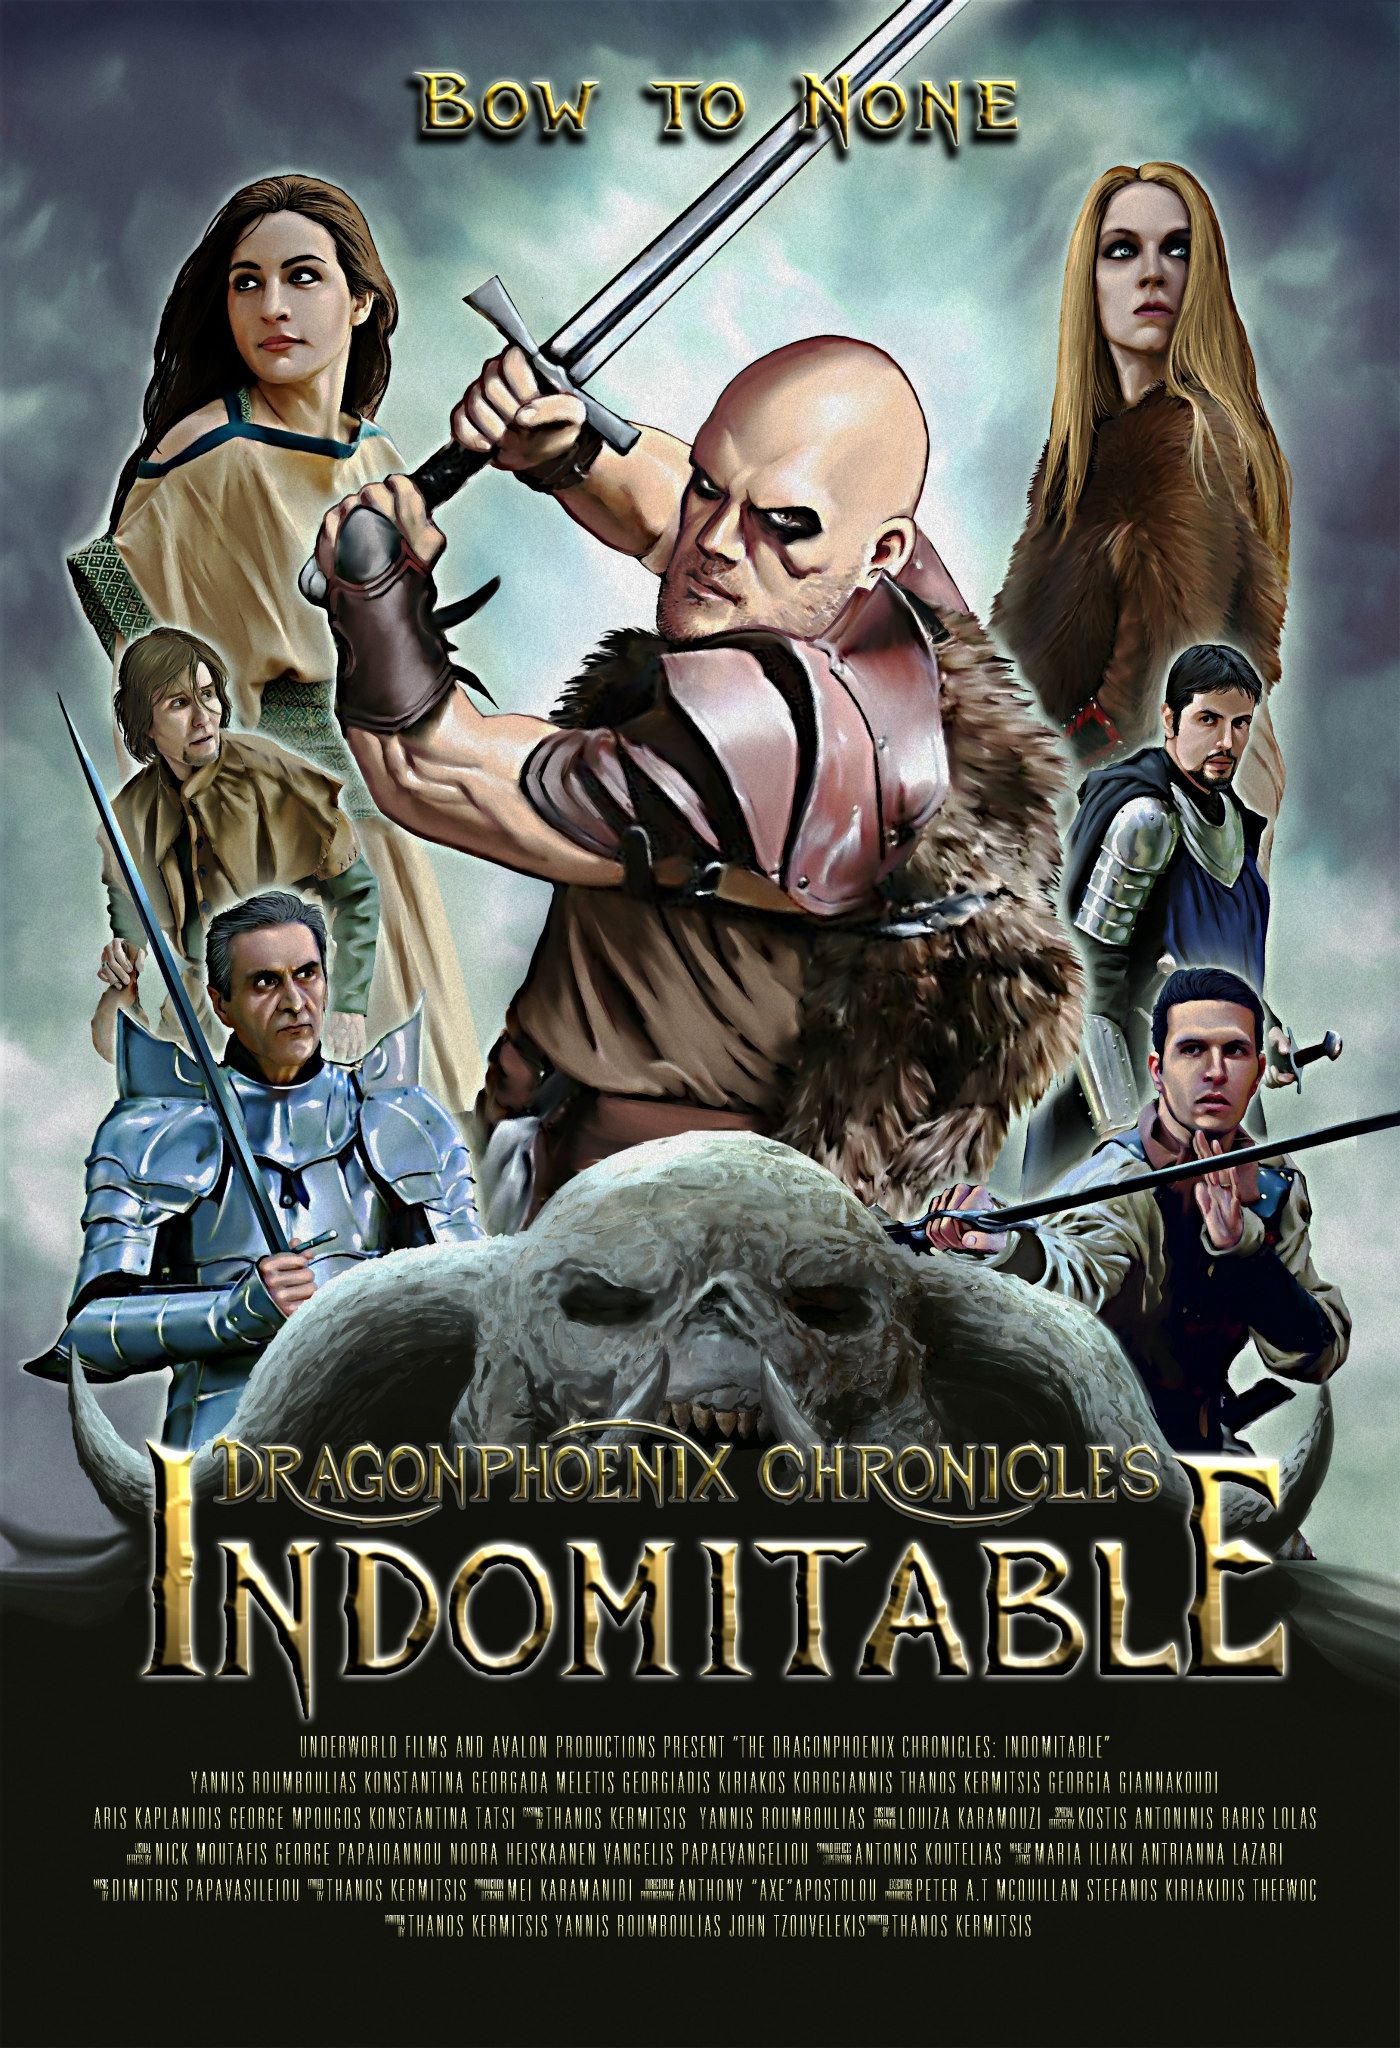 Mega Sized Movie Poster Image for The Dragonphoenix Chronicles: Indomitable (#1 of 2)